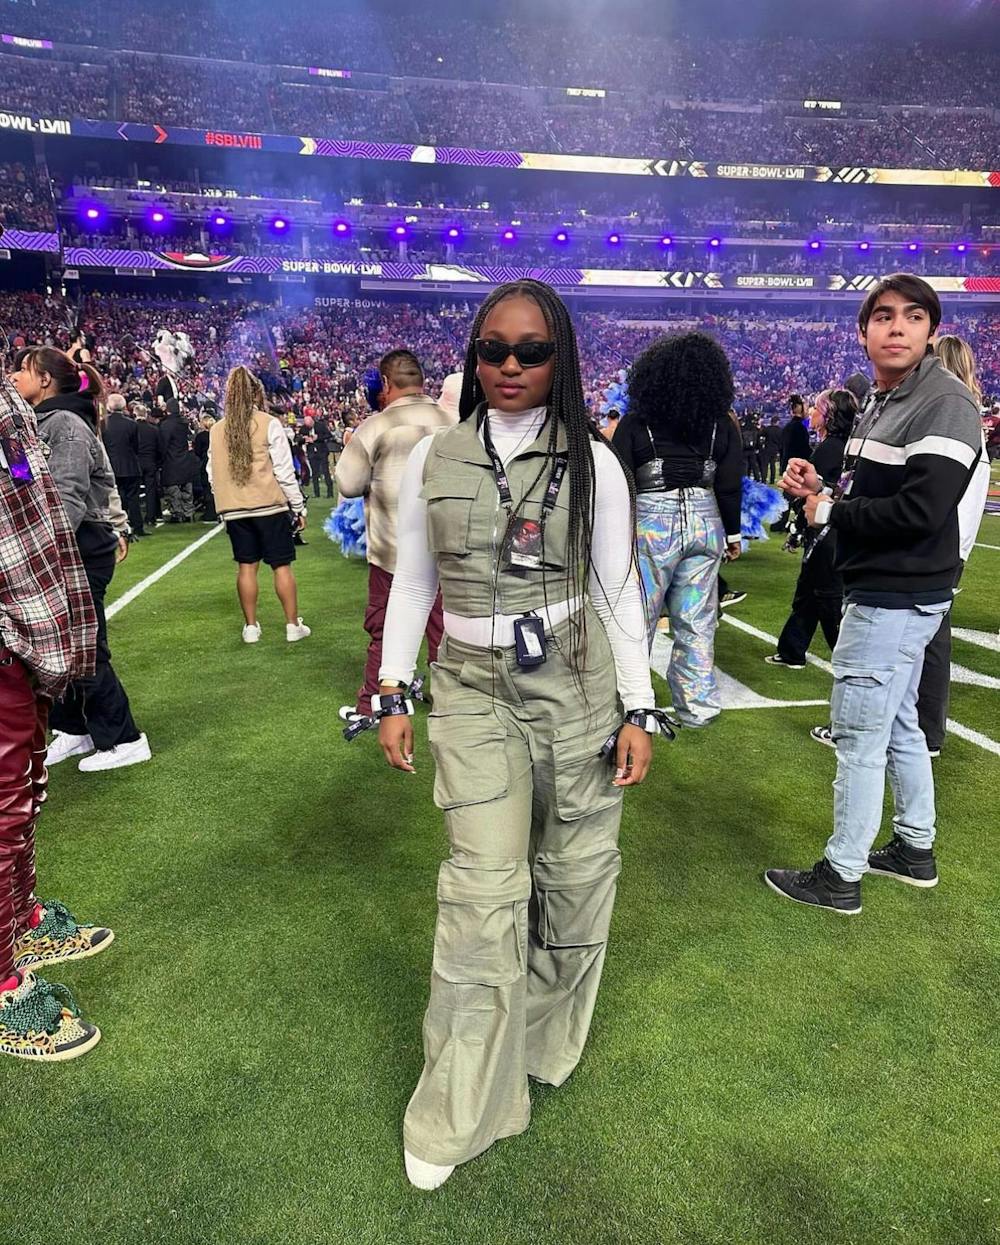 Nia Shack: From EMU to Super Bowl halftime stage